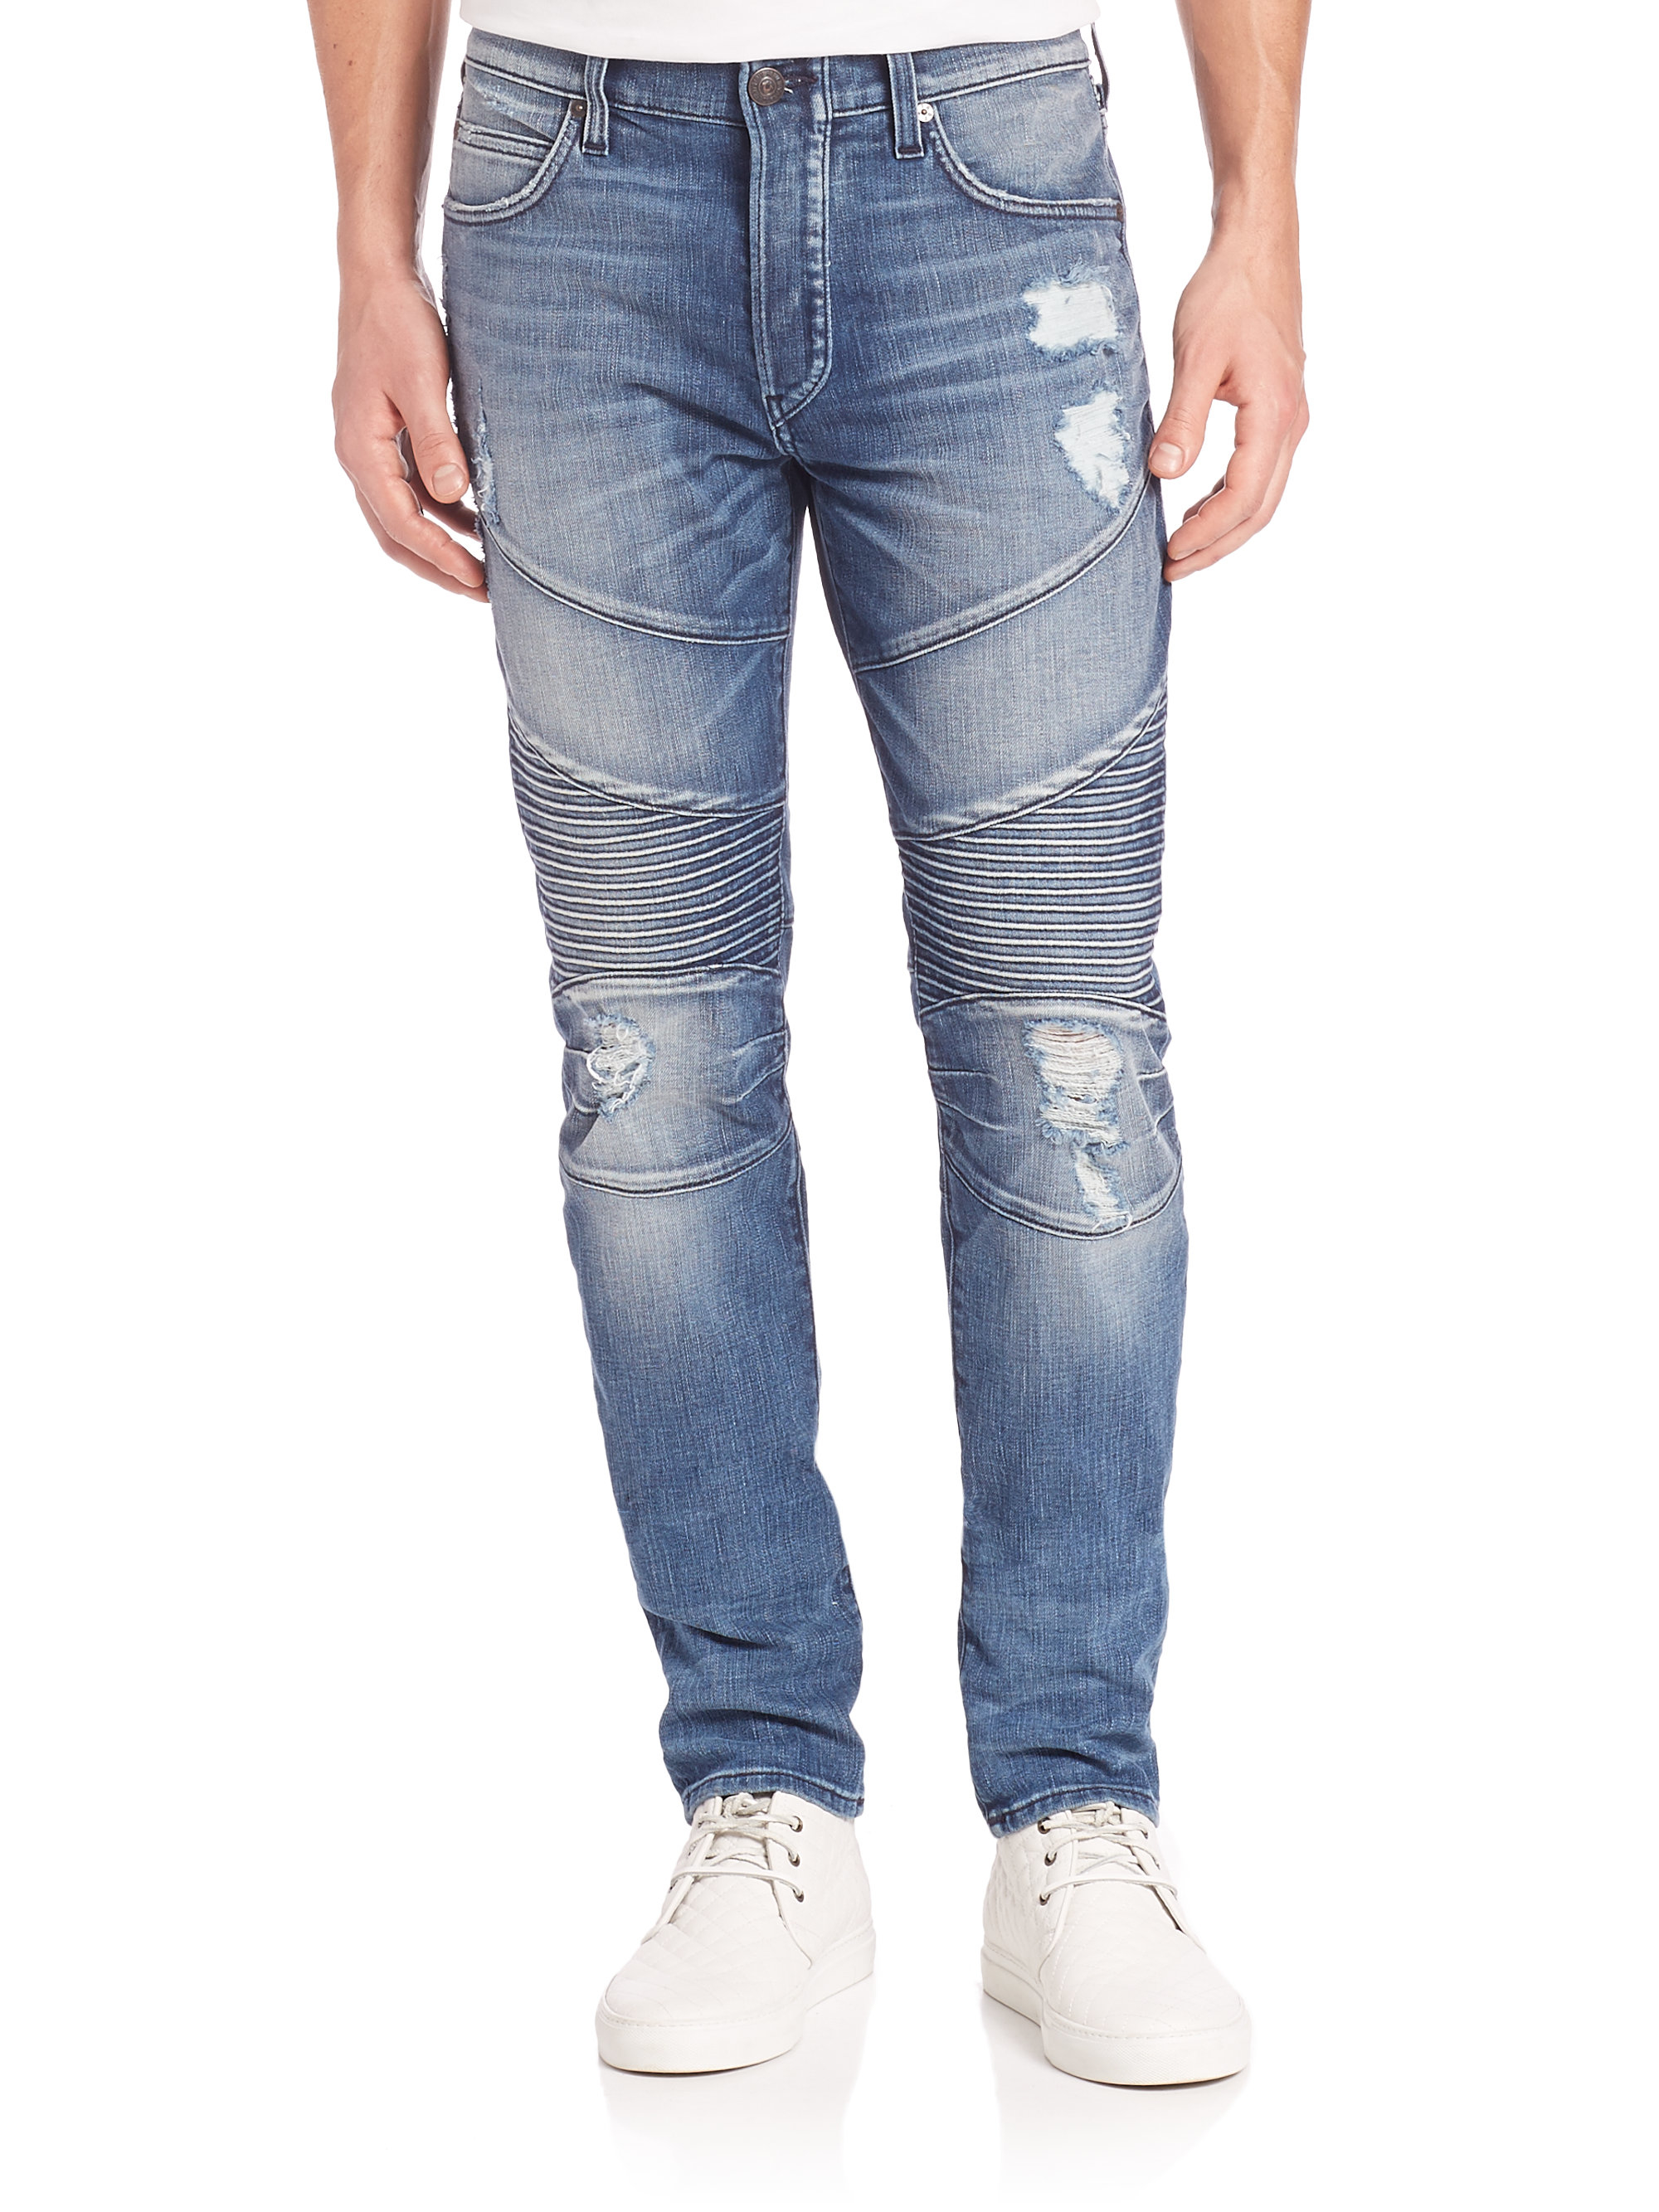 True religion Rocco Moto Relaxed Skinny Flagstone Jeans for Men | Lyst